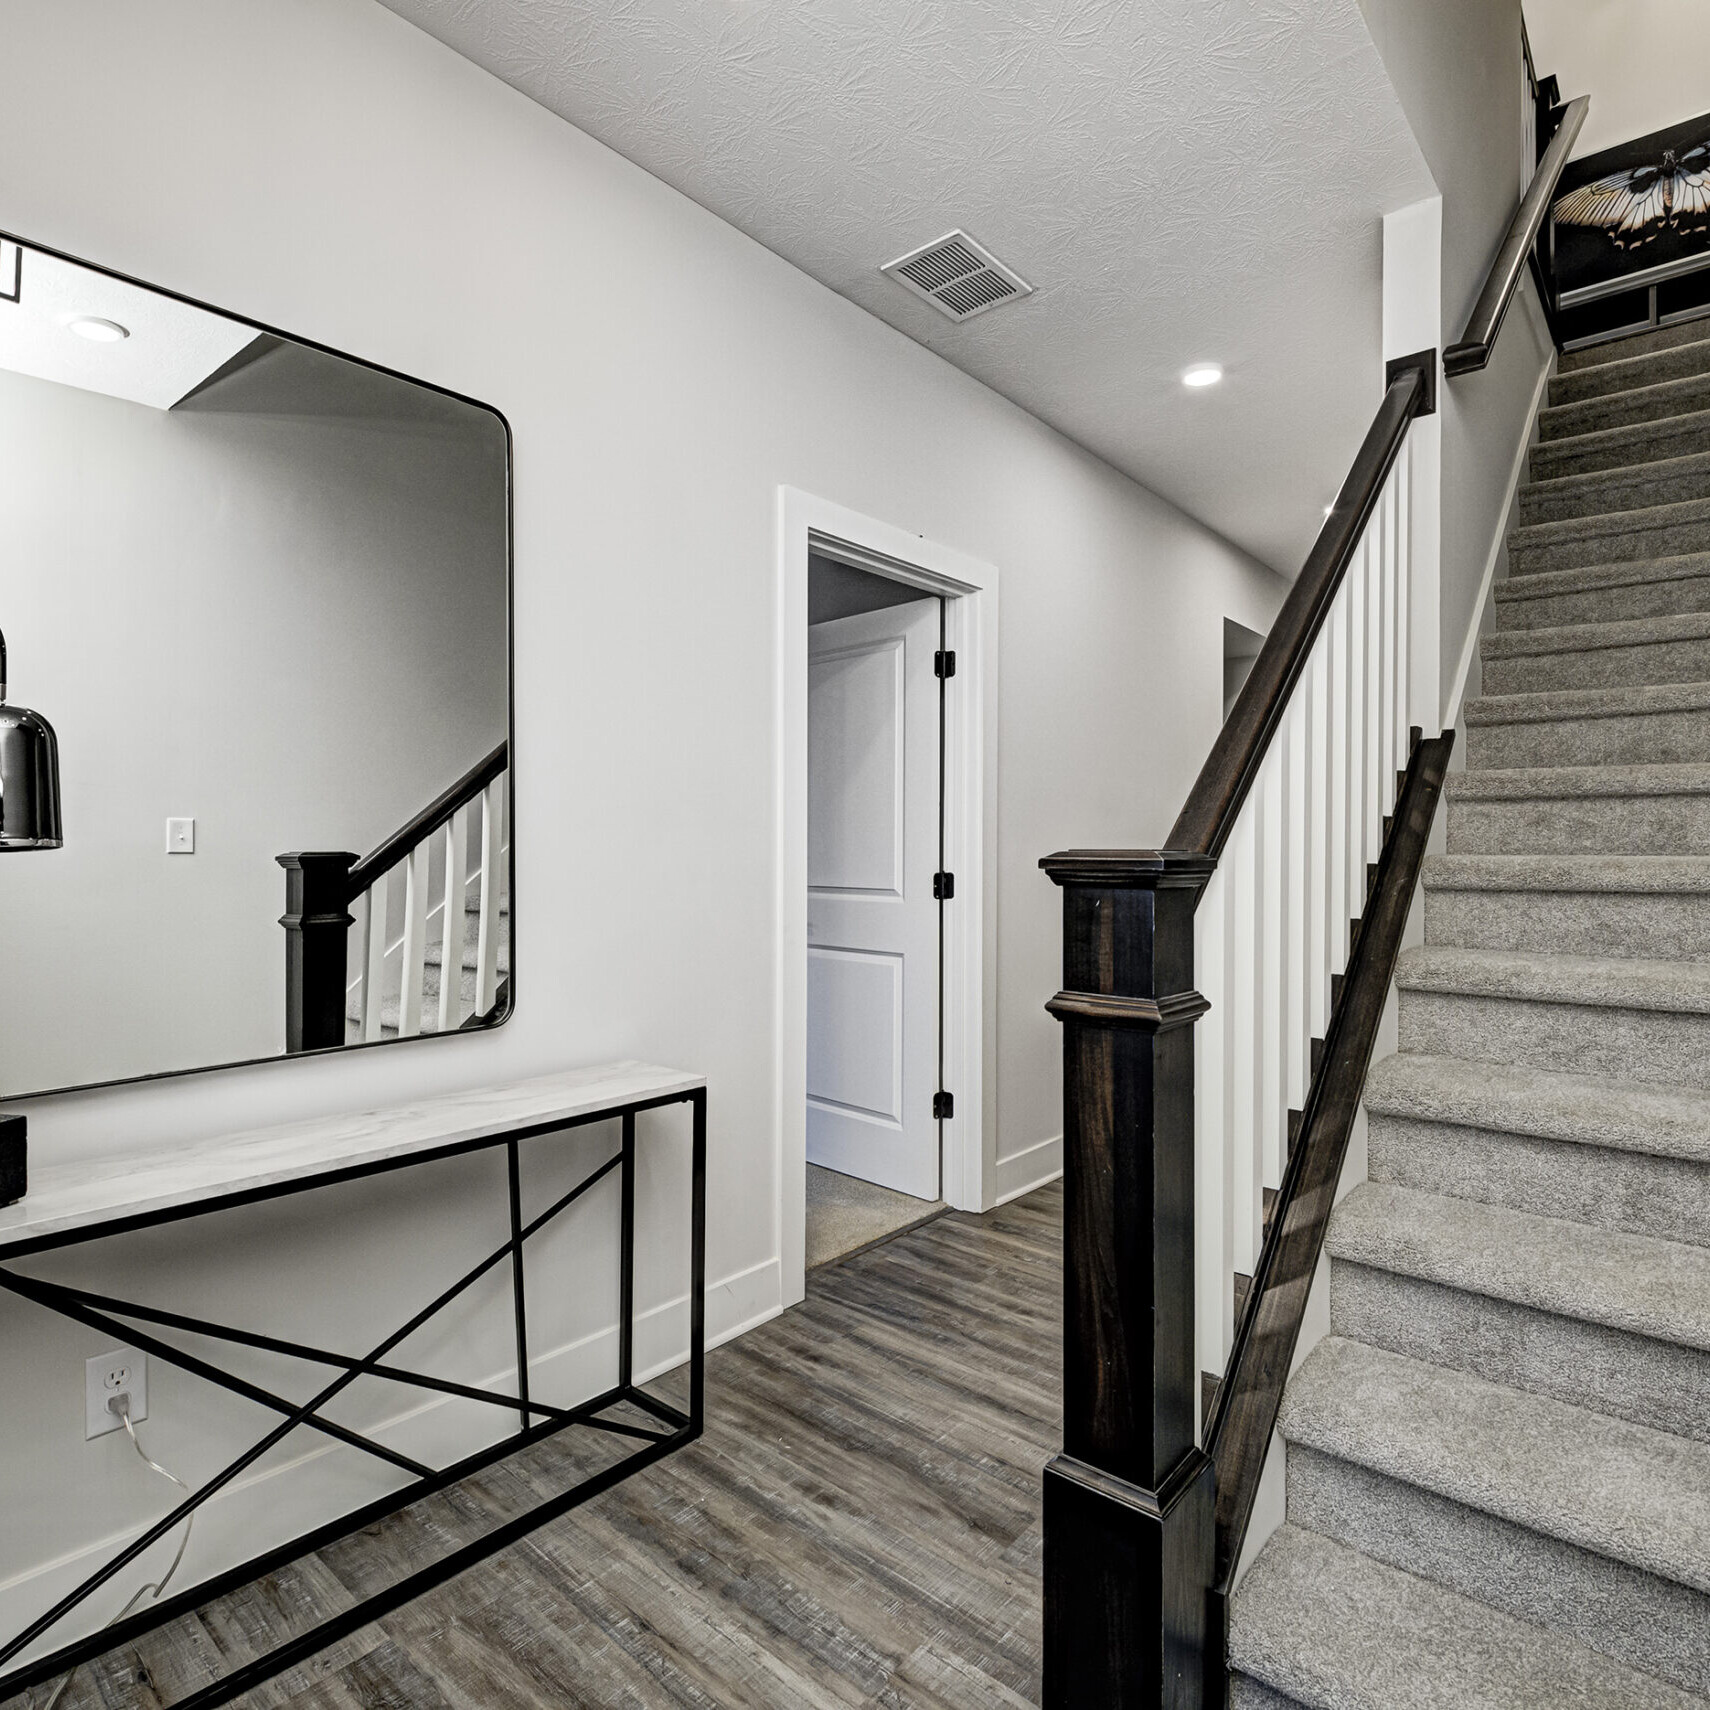 A hallway in a new home with stairs and a mirror.